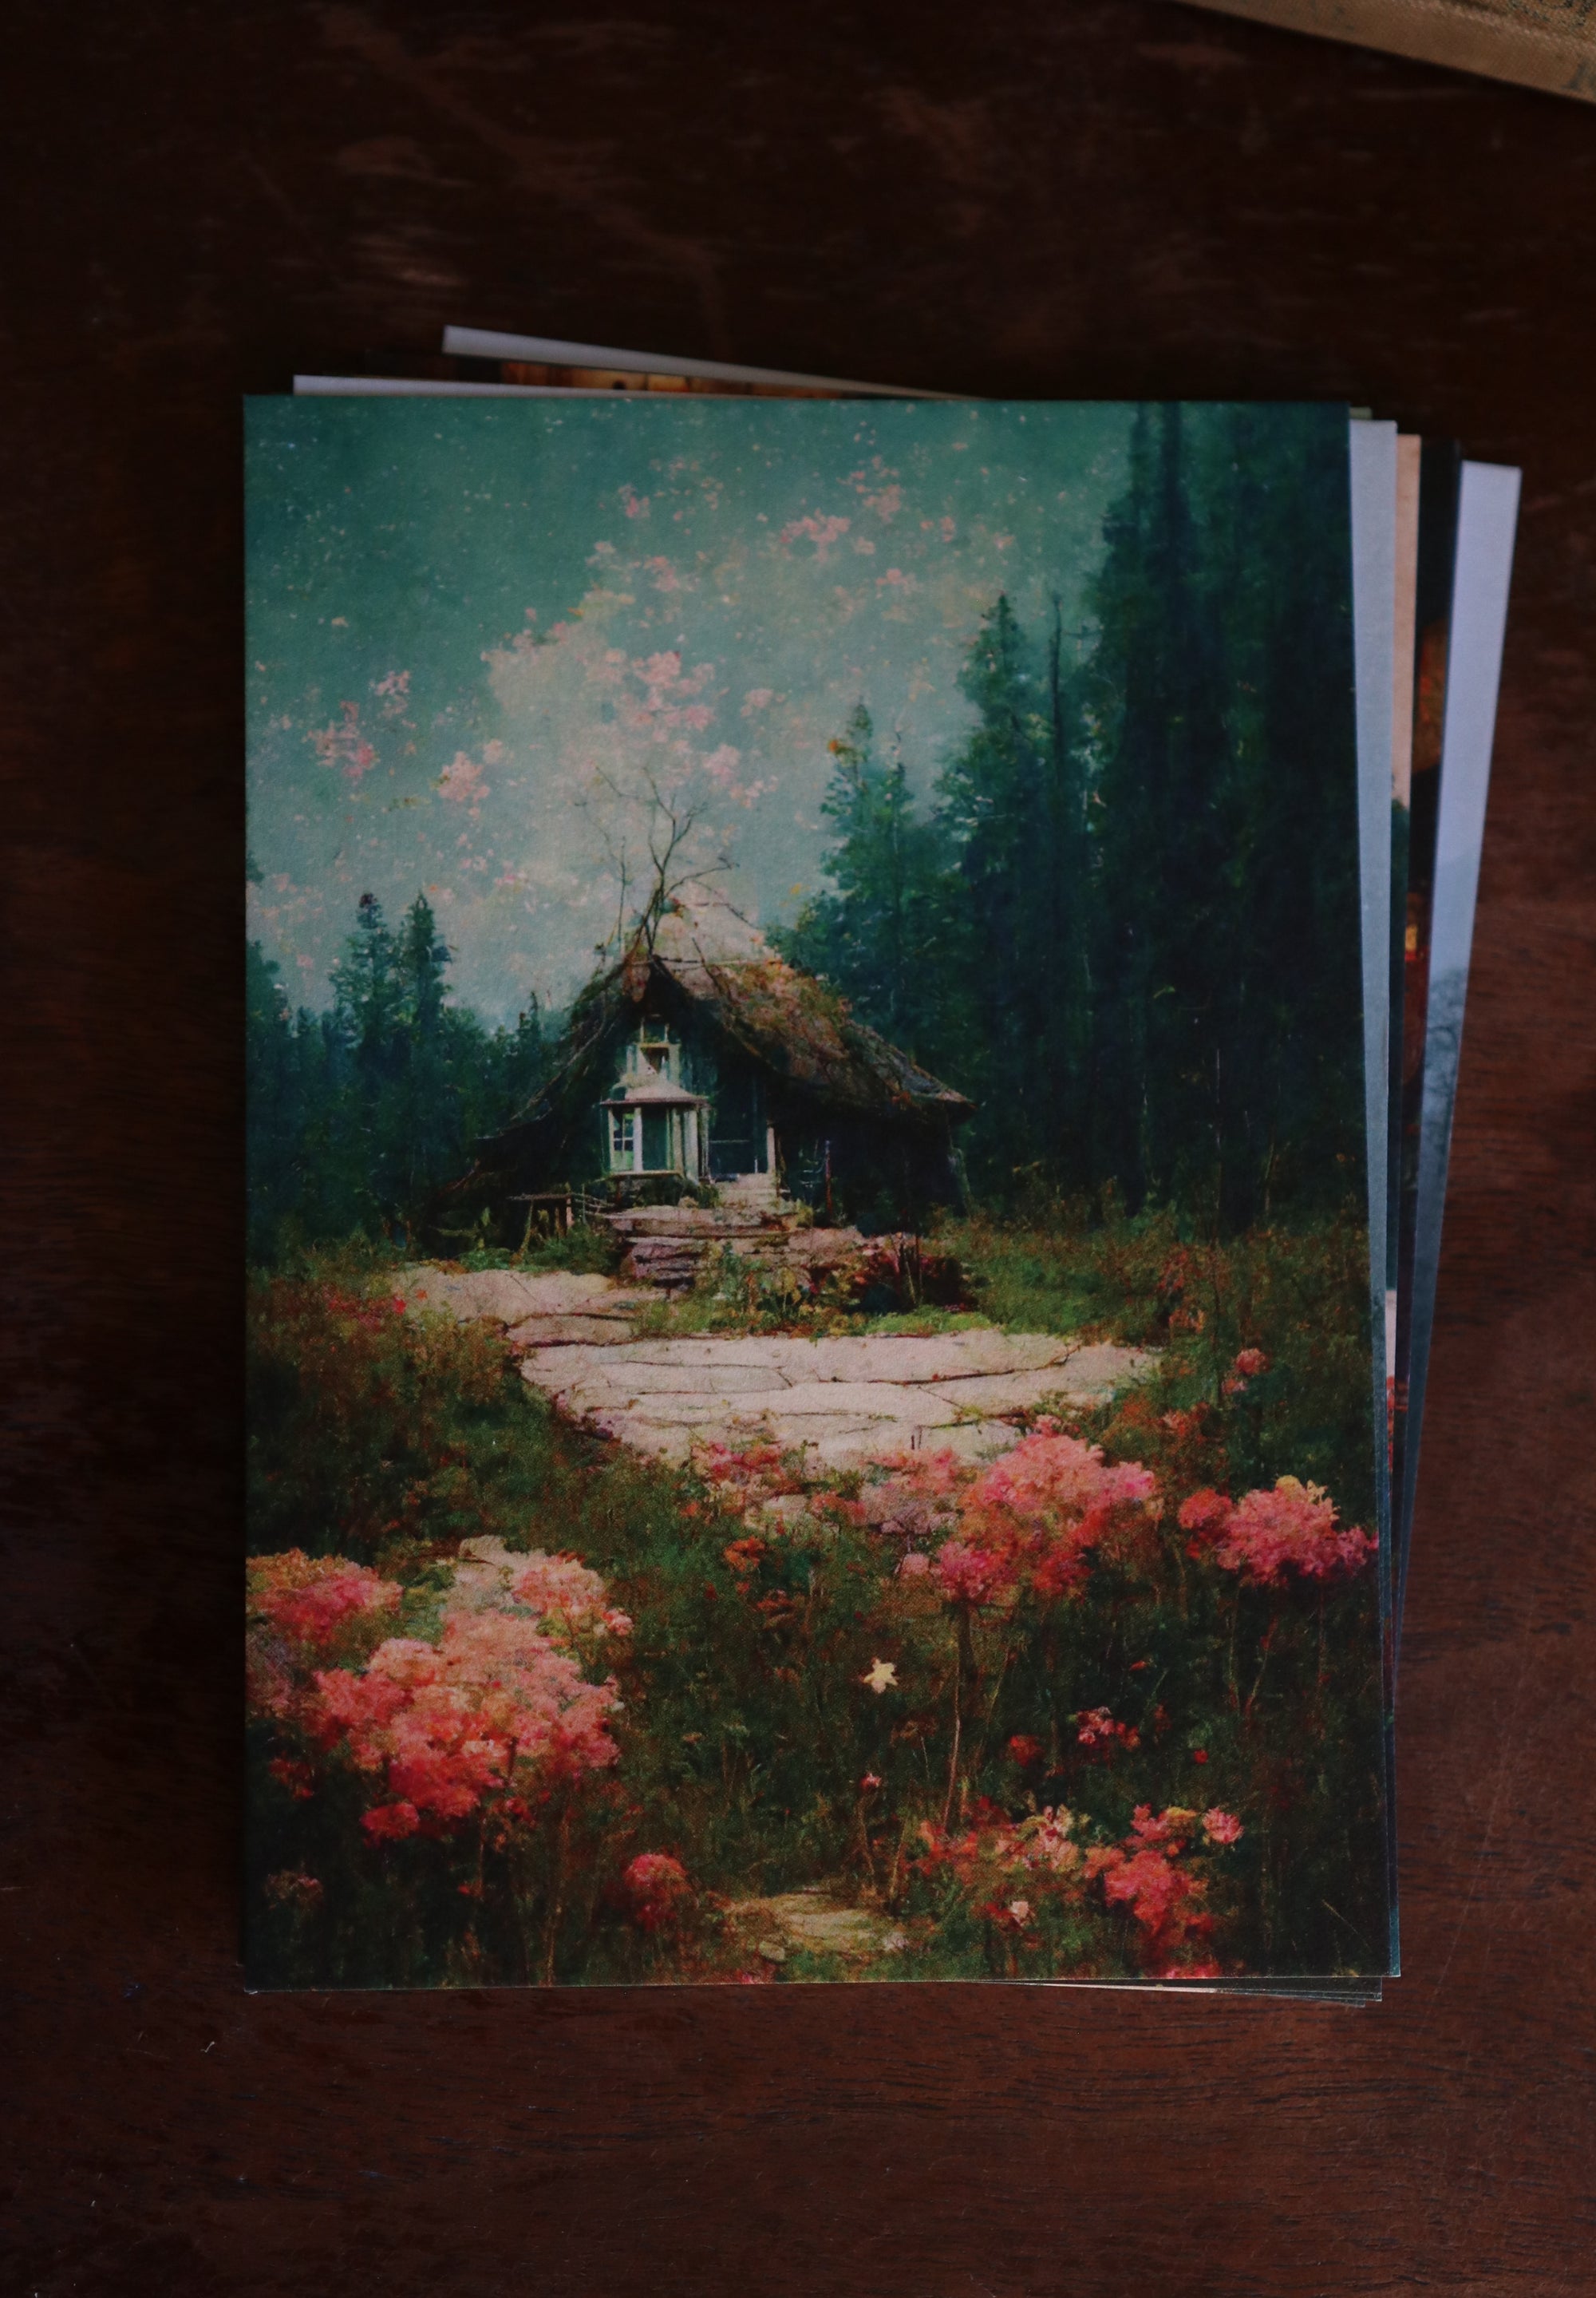 The Cottage/Library Collection - Notecard / Stationery / Art - 10 Count.